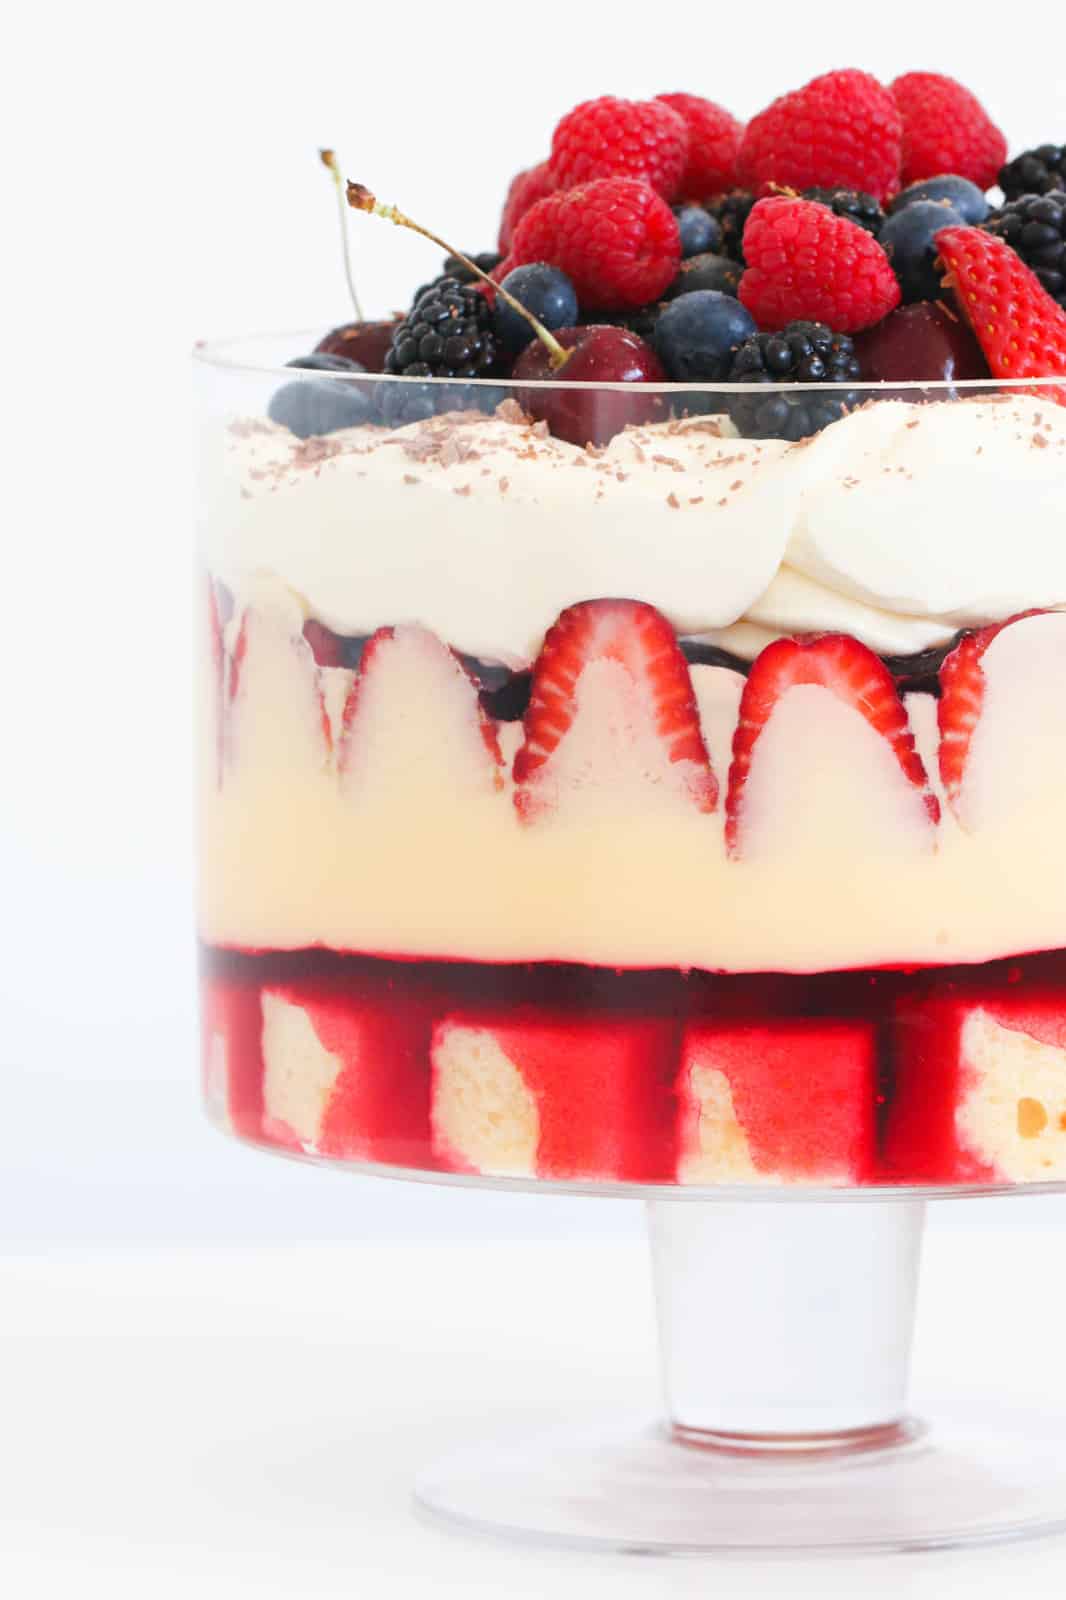 Layers of custard, jelly, cream, berries and cake in a dessert bowl.